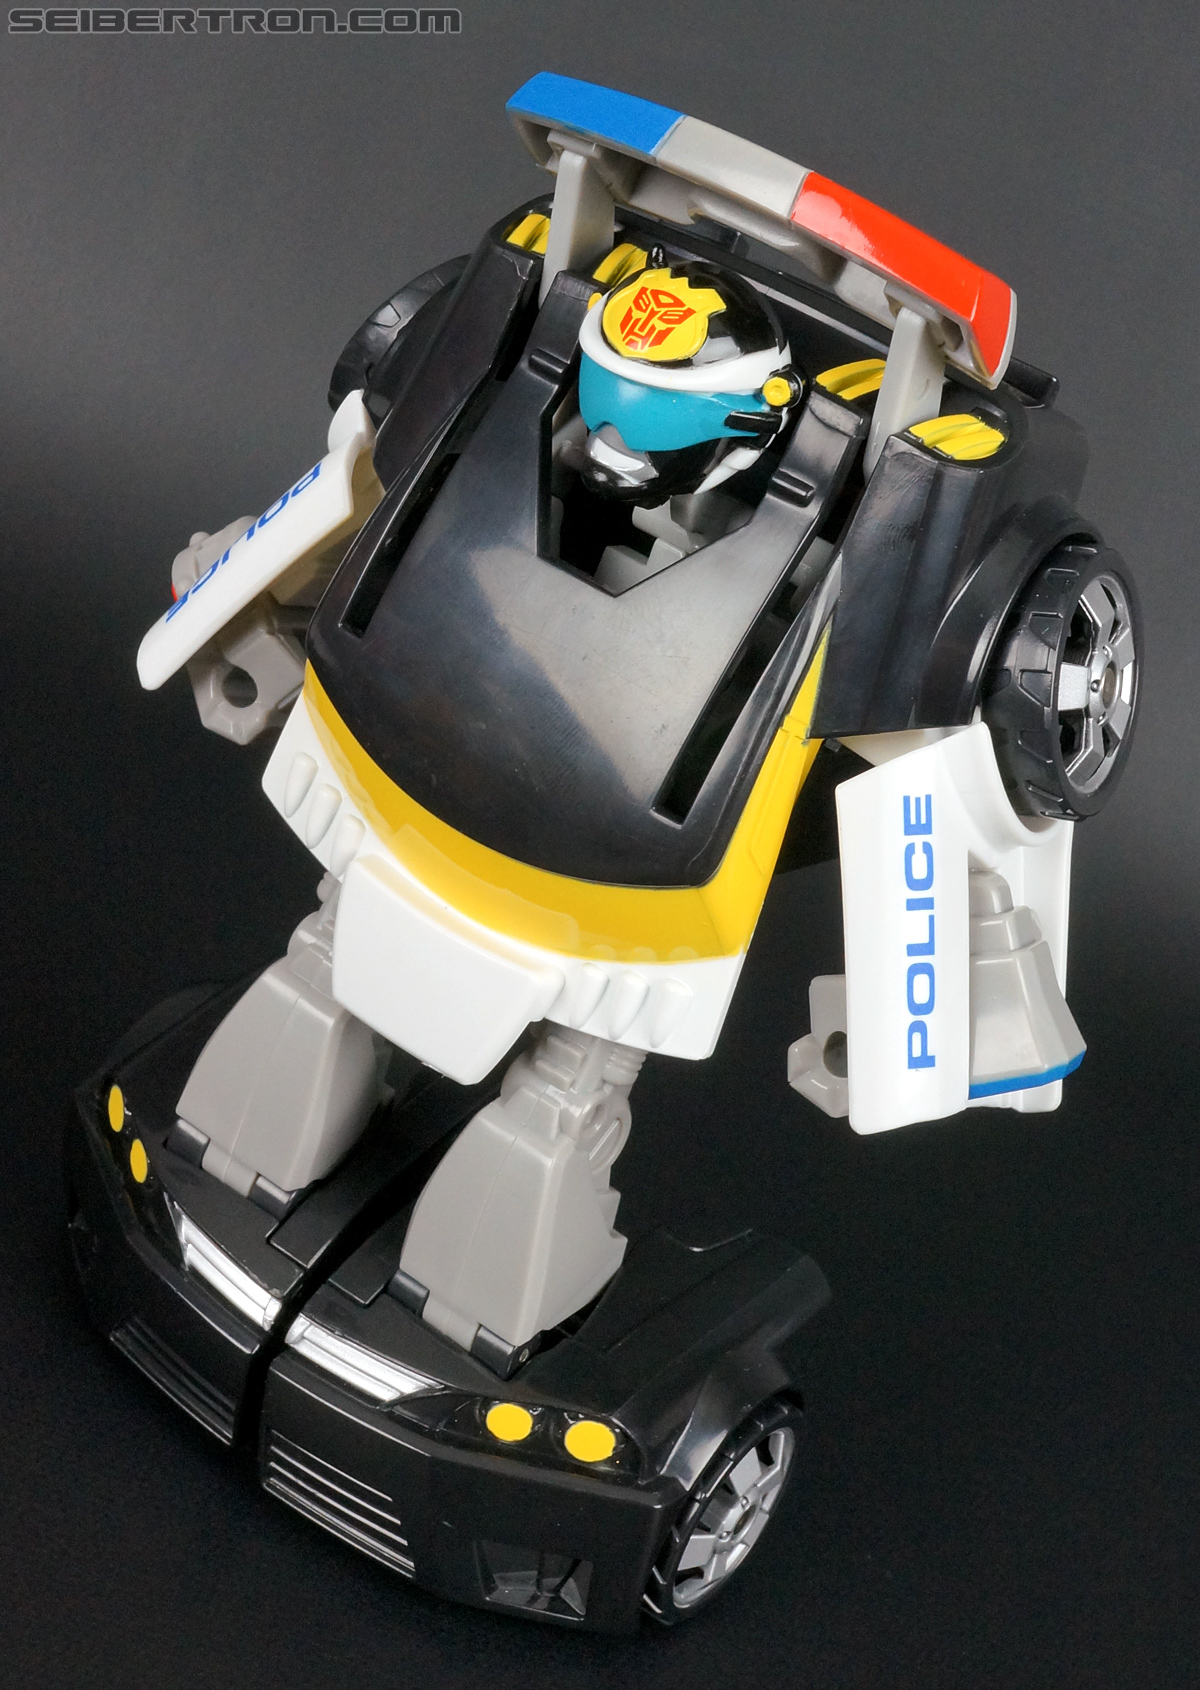 Transformers Rescue Bots Chase the Police-Bot (Image #54 of 97)